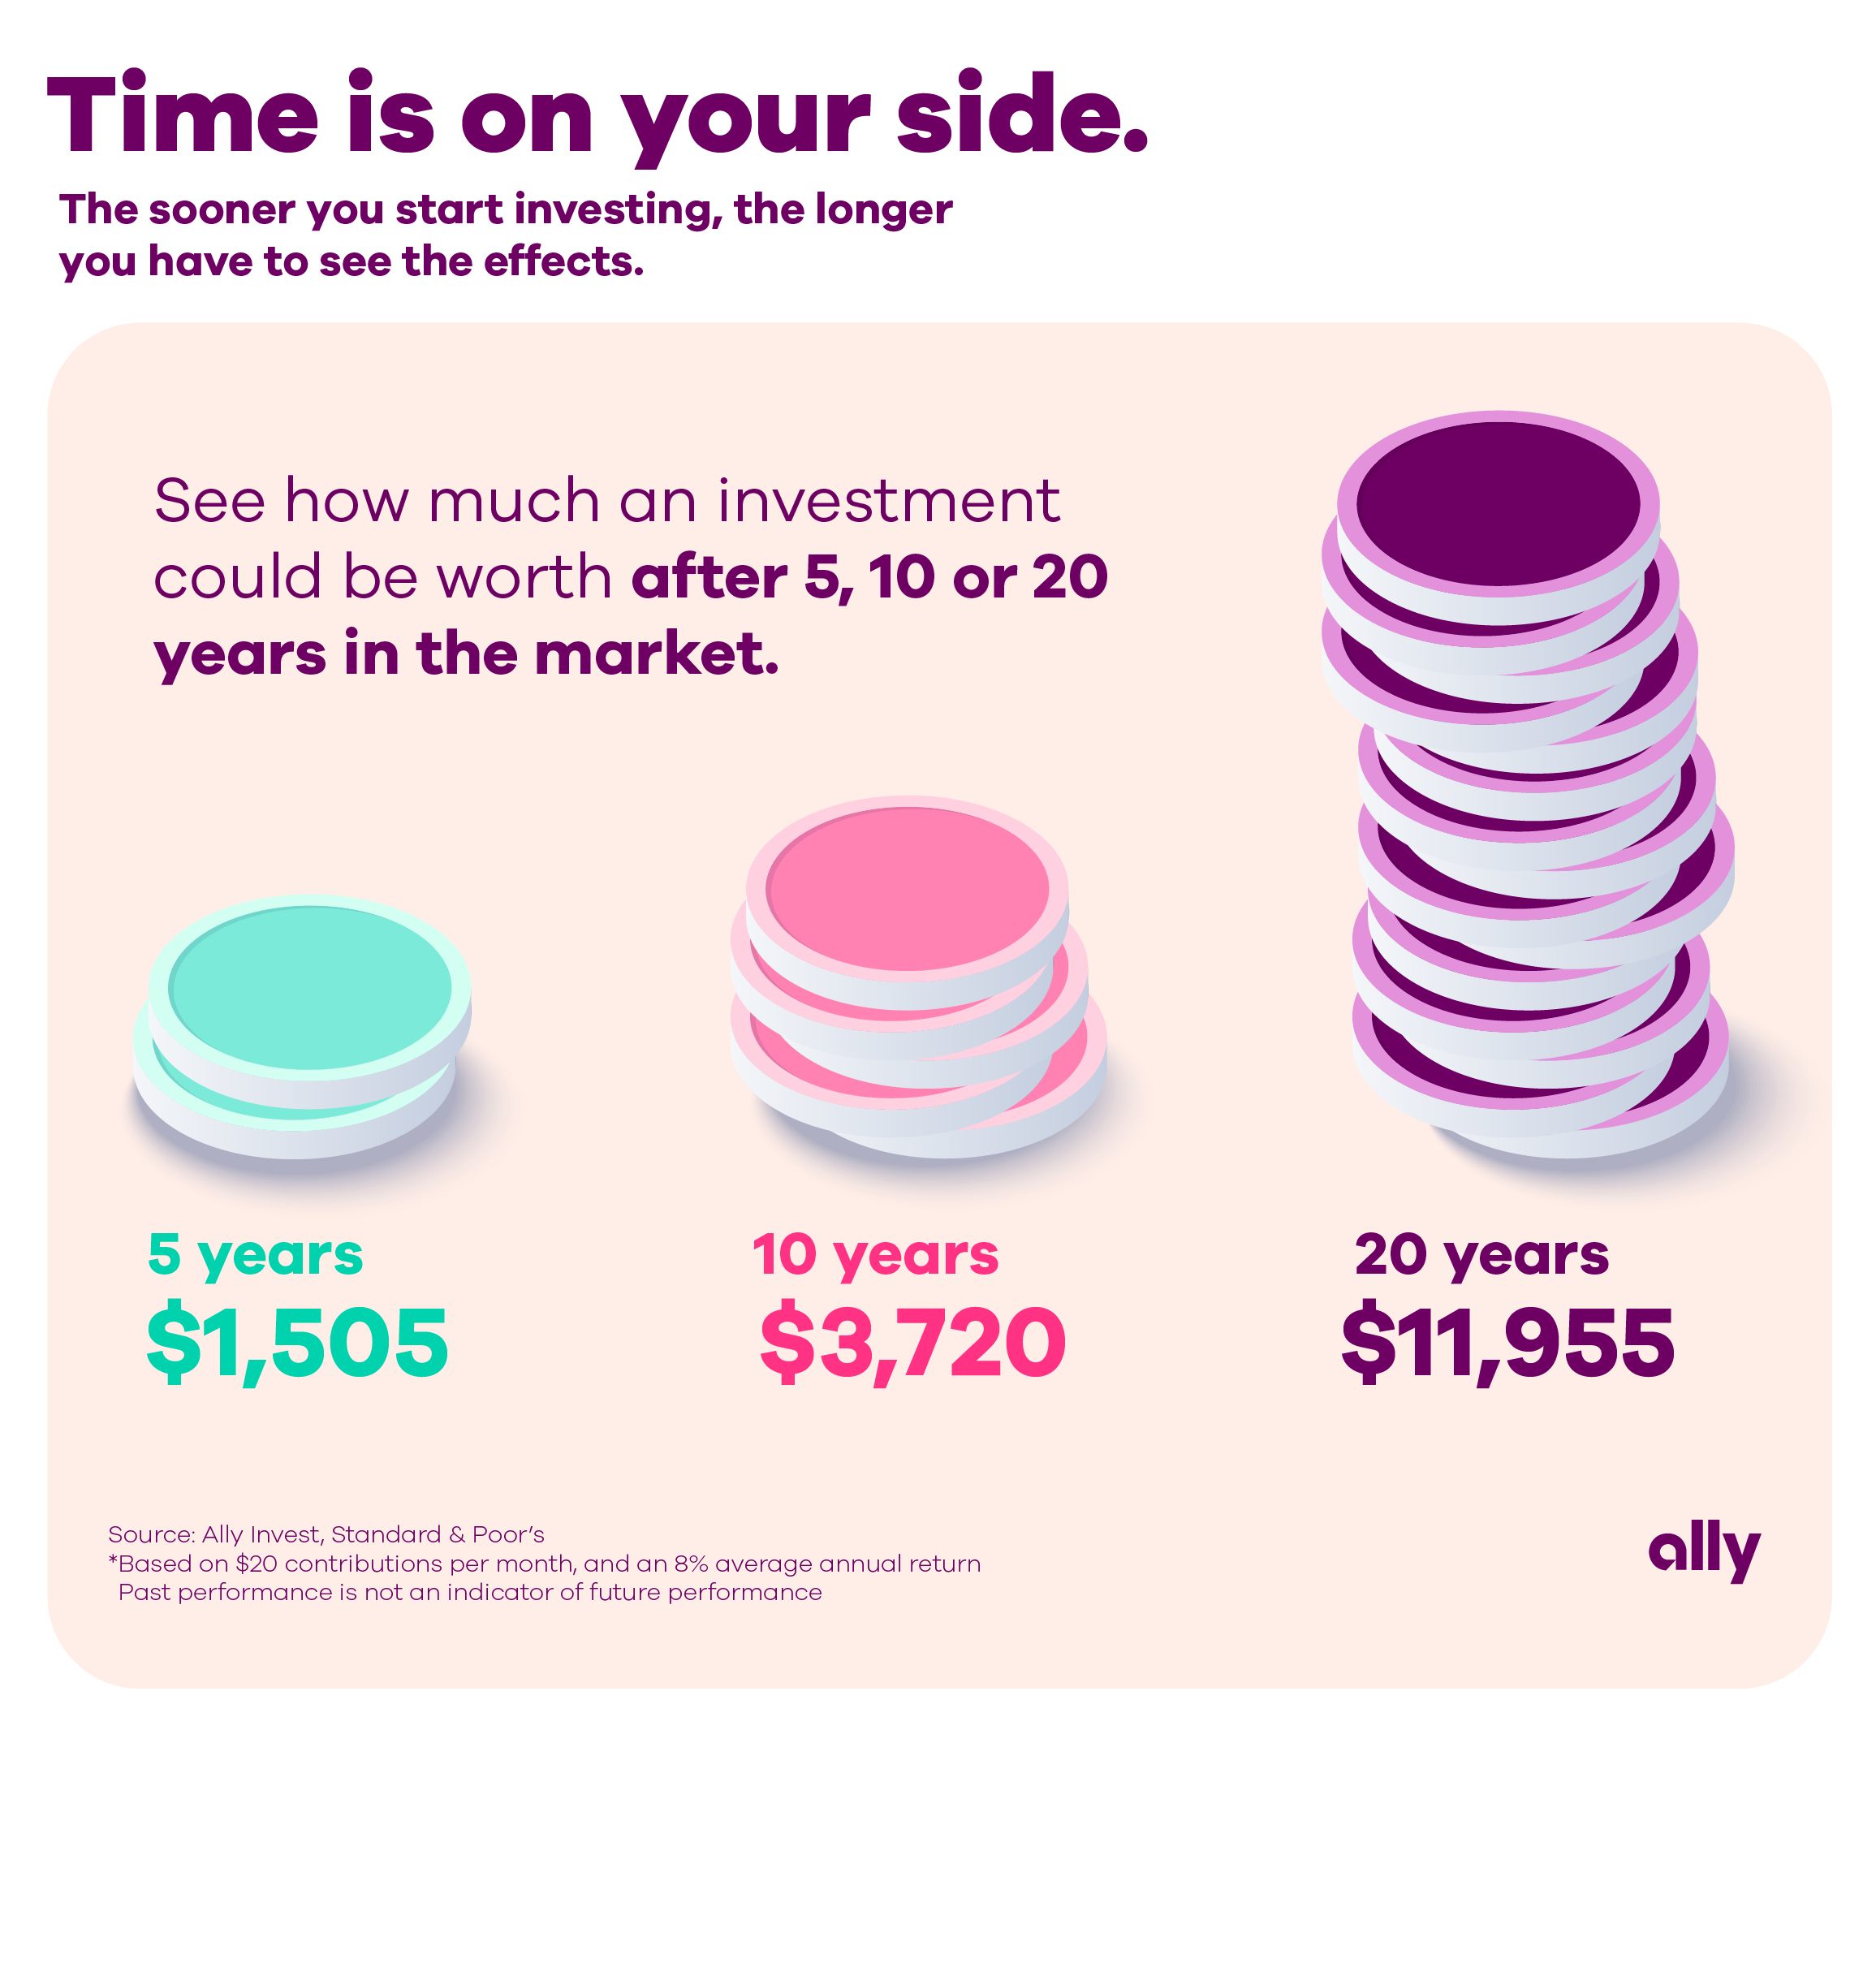 Image titled Time is on your side. The sooner you start investing, the longer you have to see the effects. See how much an investment could be worth after 5, 10 or 20 years in the market. At 5 years, $1,505. At 10 years, $3,720. At 20 years, $11,955. Based on $20 contributions per month and an 8% average annual return. Past performance is not an indicator of future performance. Source: Ally Invest, Standard and Poor's.